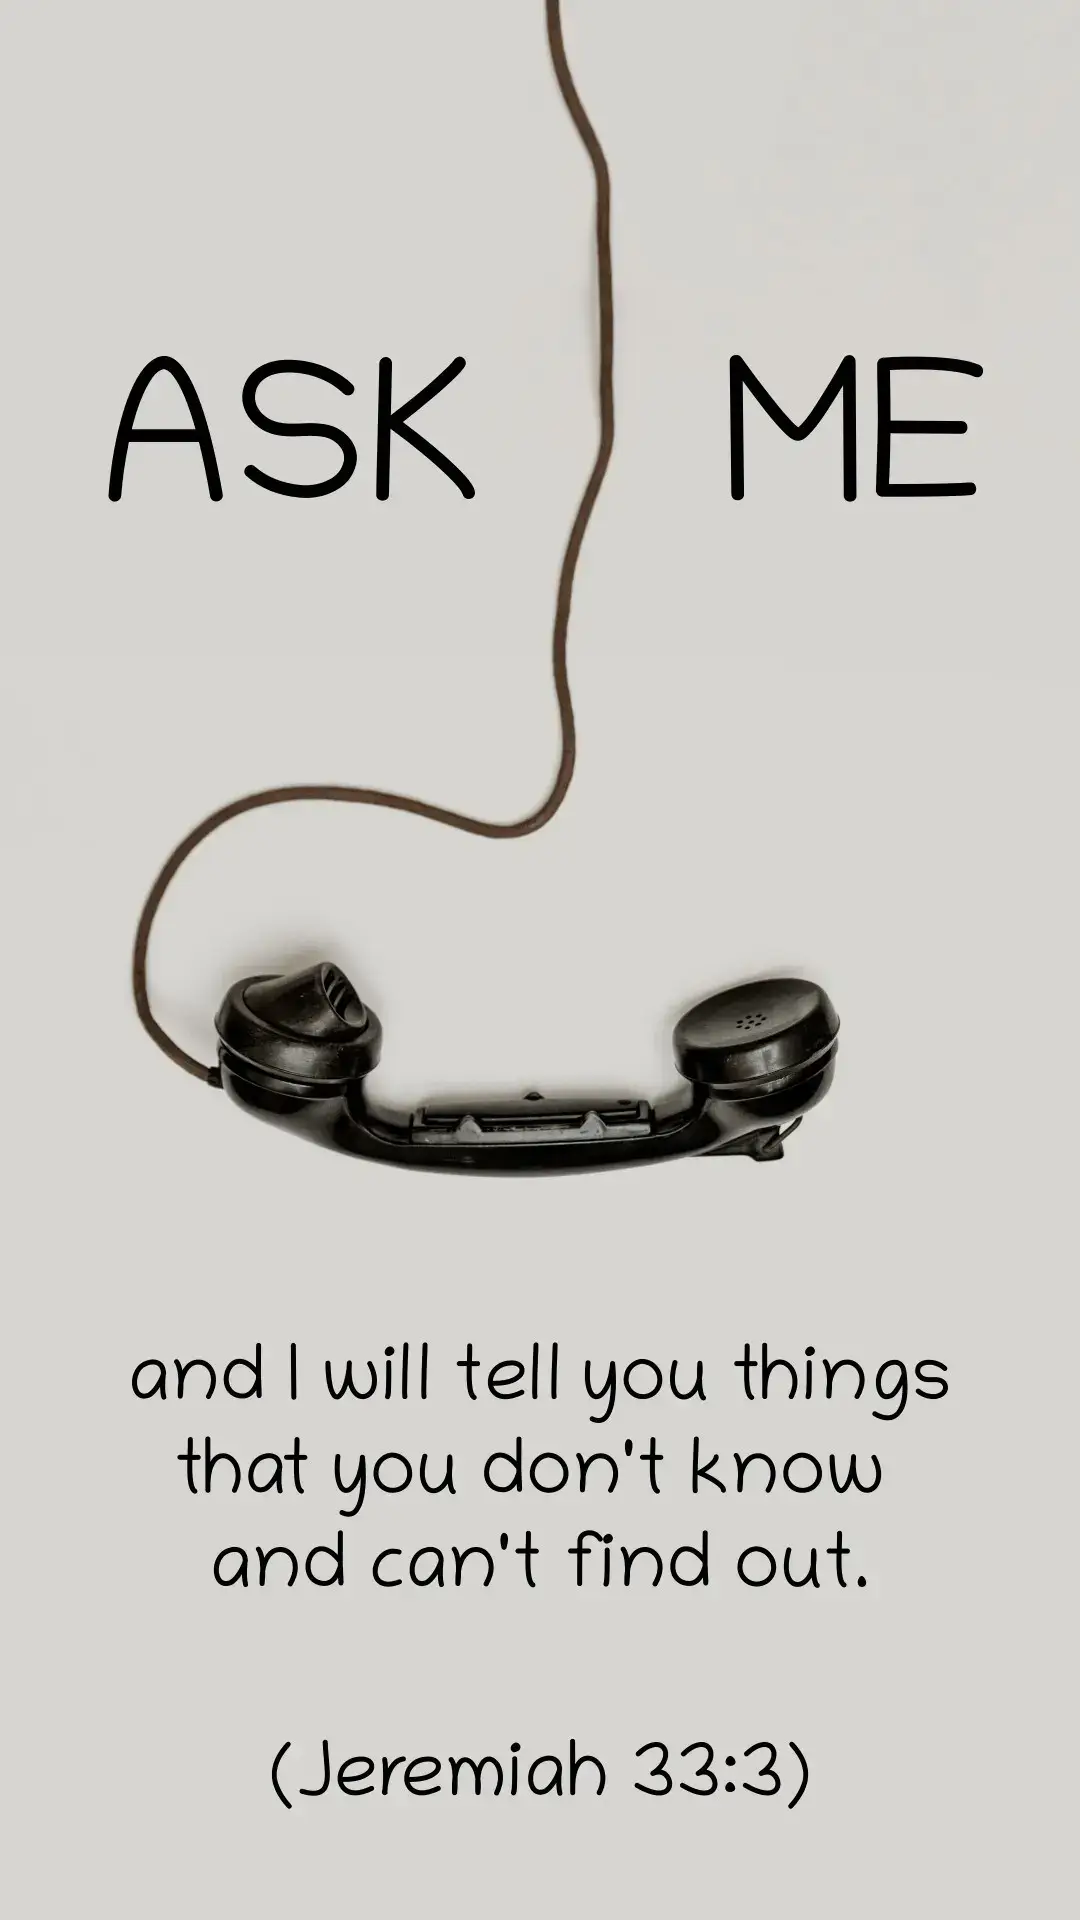 Ask me, and I will tell you things that you don't know and can't find out. (Jer 33:3)